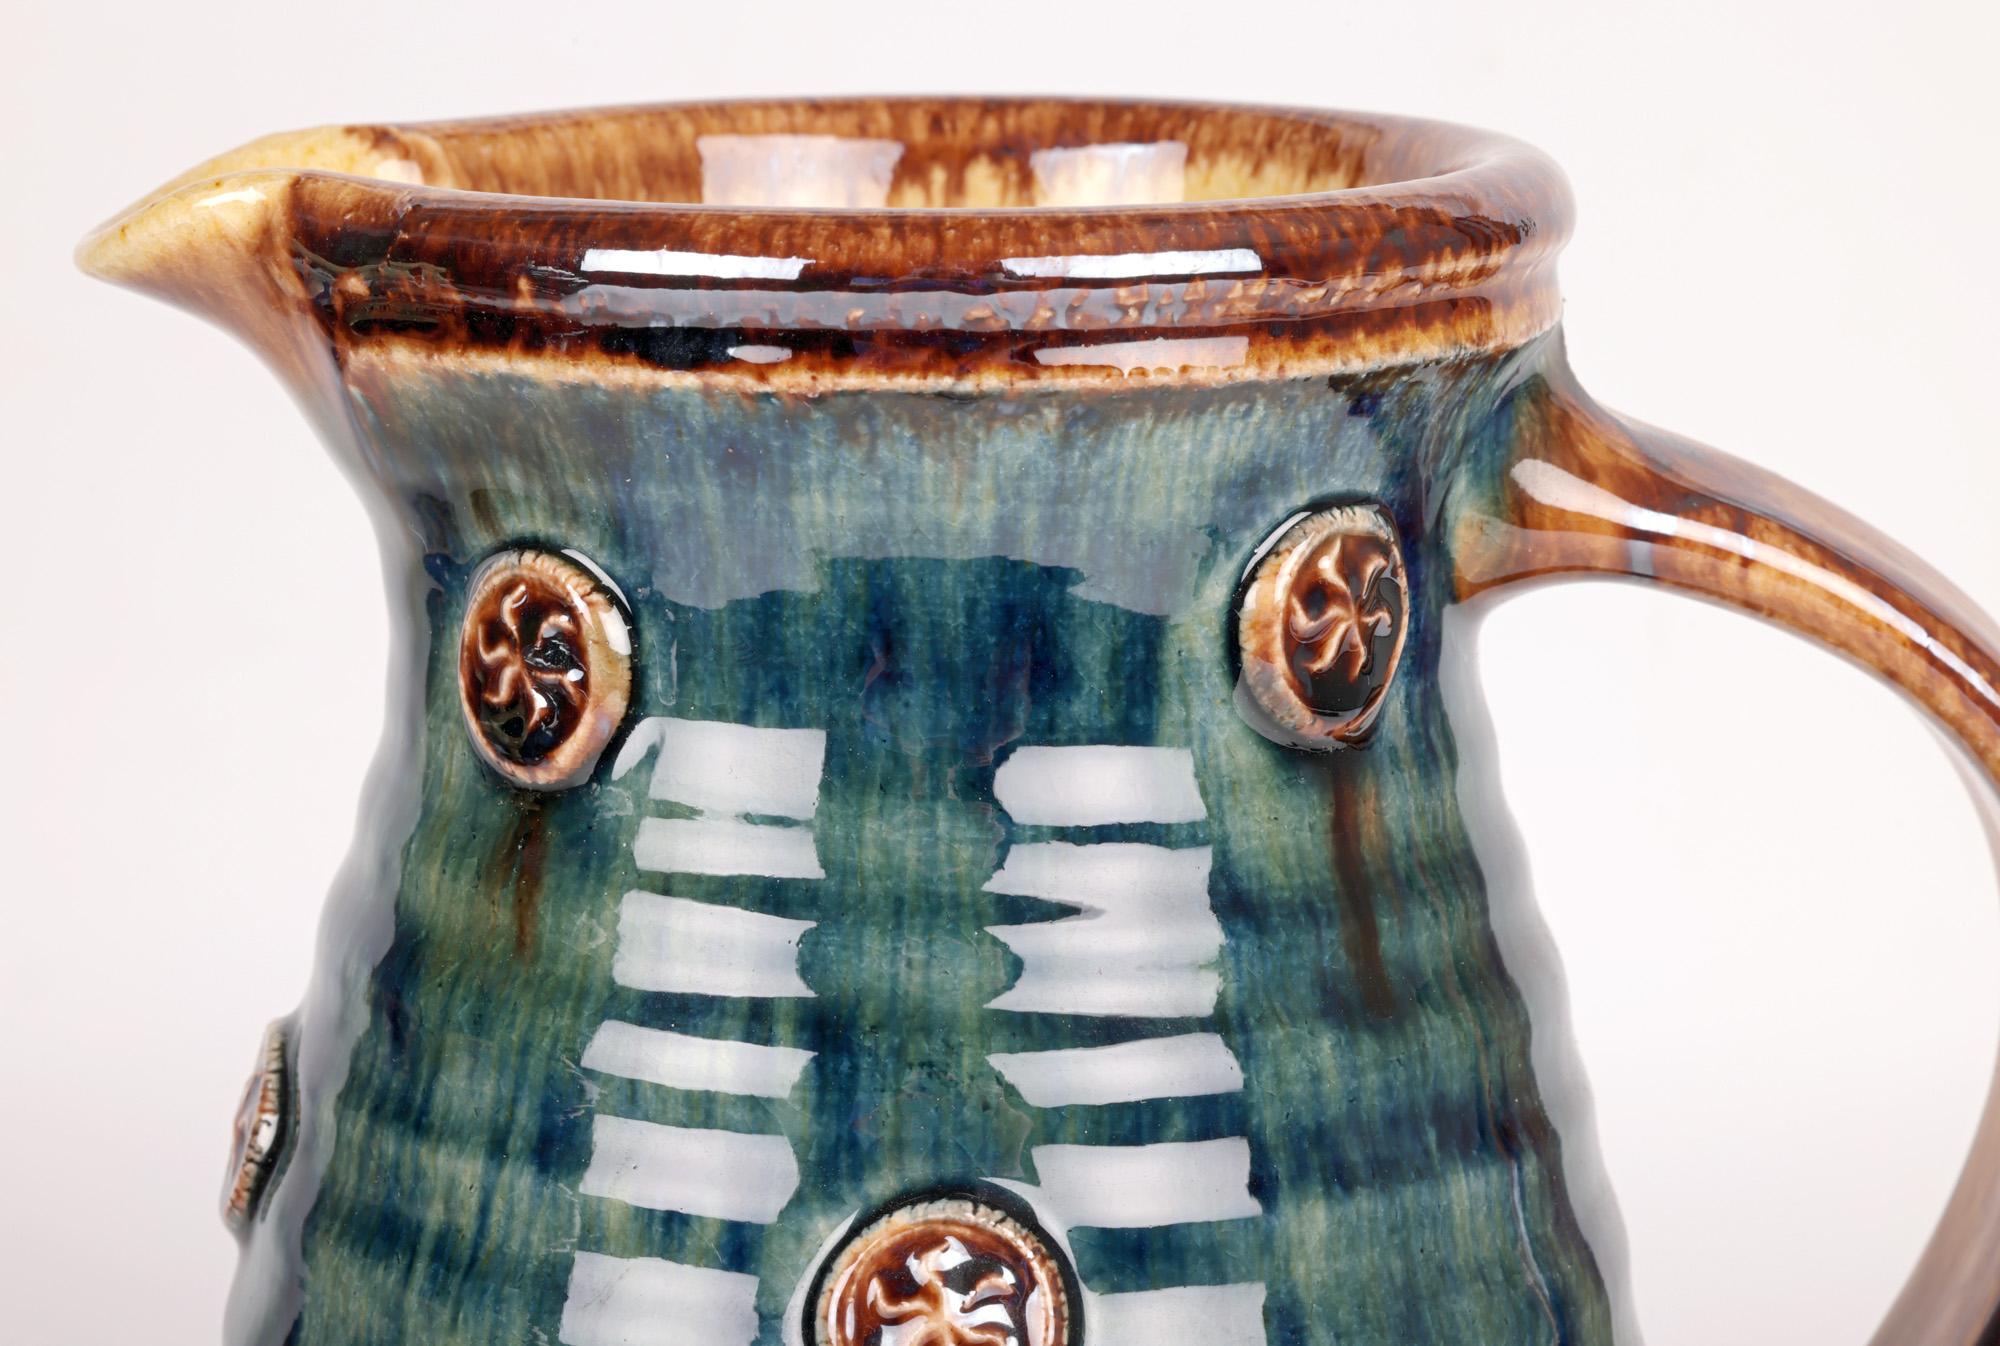 A tall and stylish British studio pottery jug made at Station Pottery by renowned potter Paul Young and dating from the latter 20th century. Paul Young is influenced by the work of many of the earlier Staffordshire potteries including Whieldon and